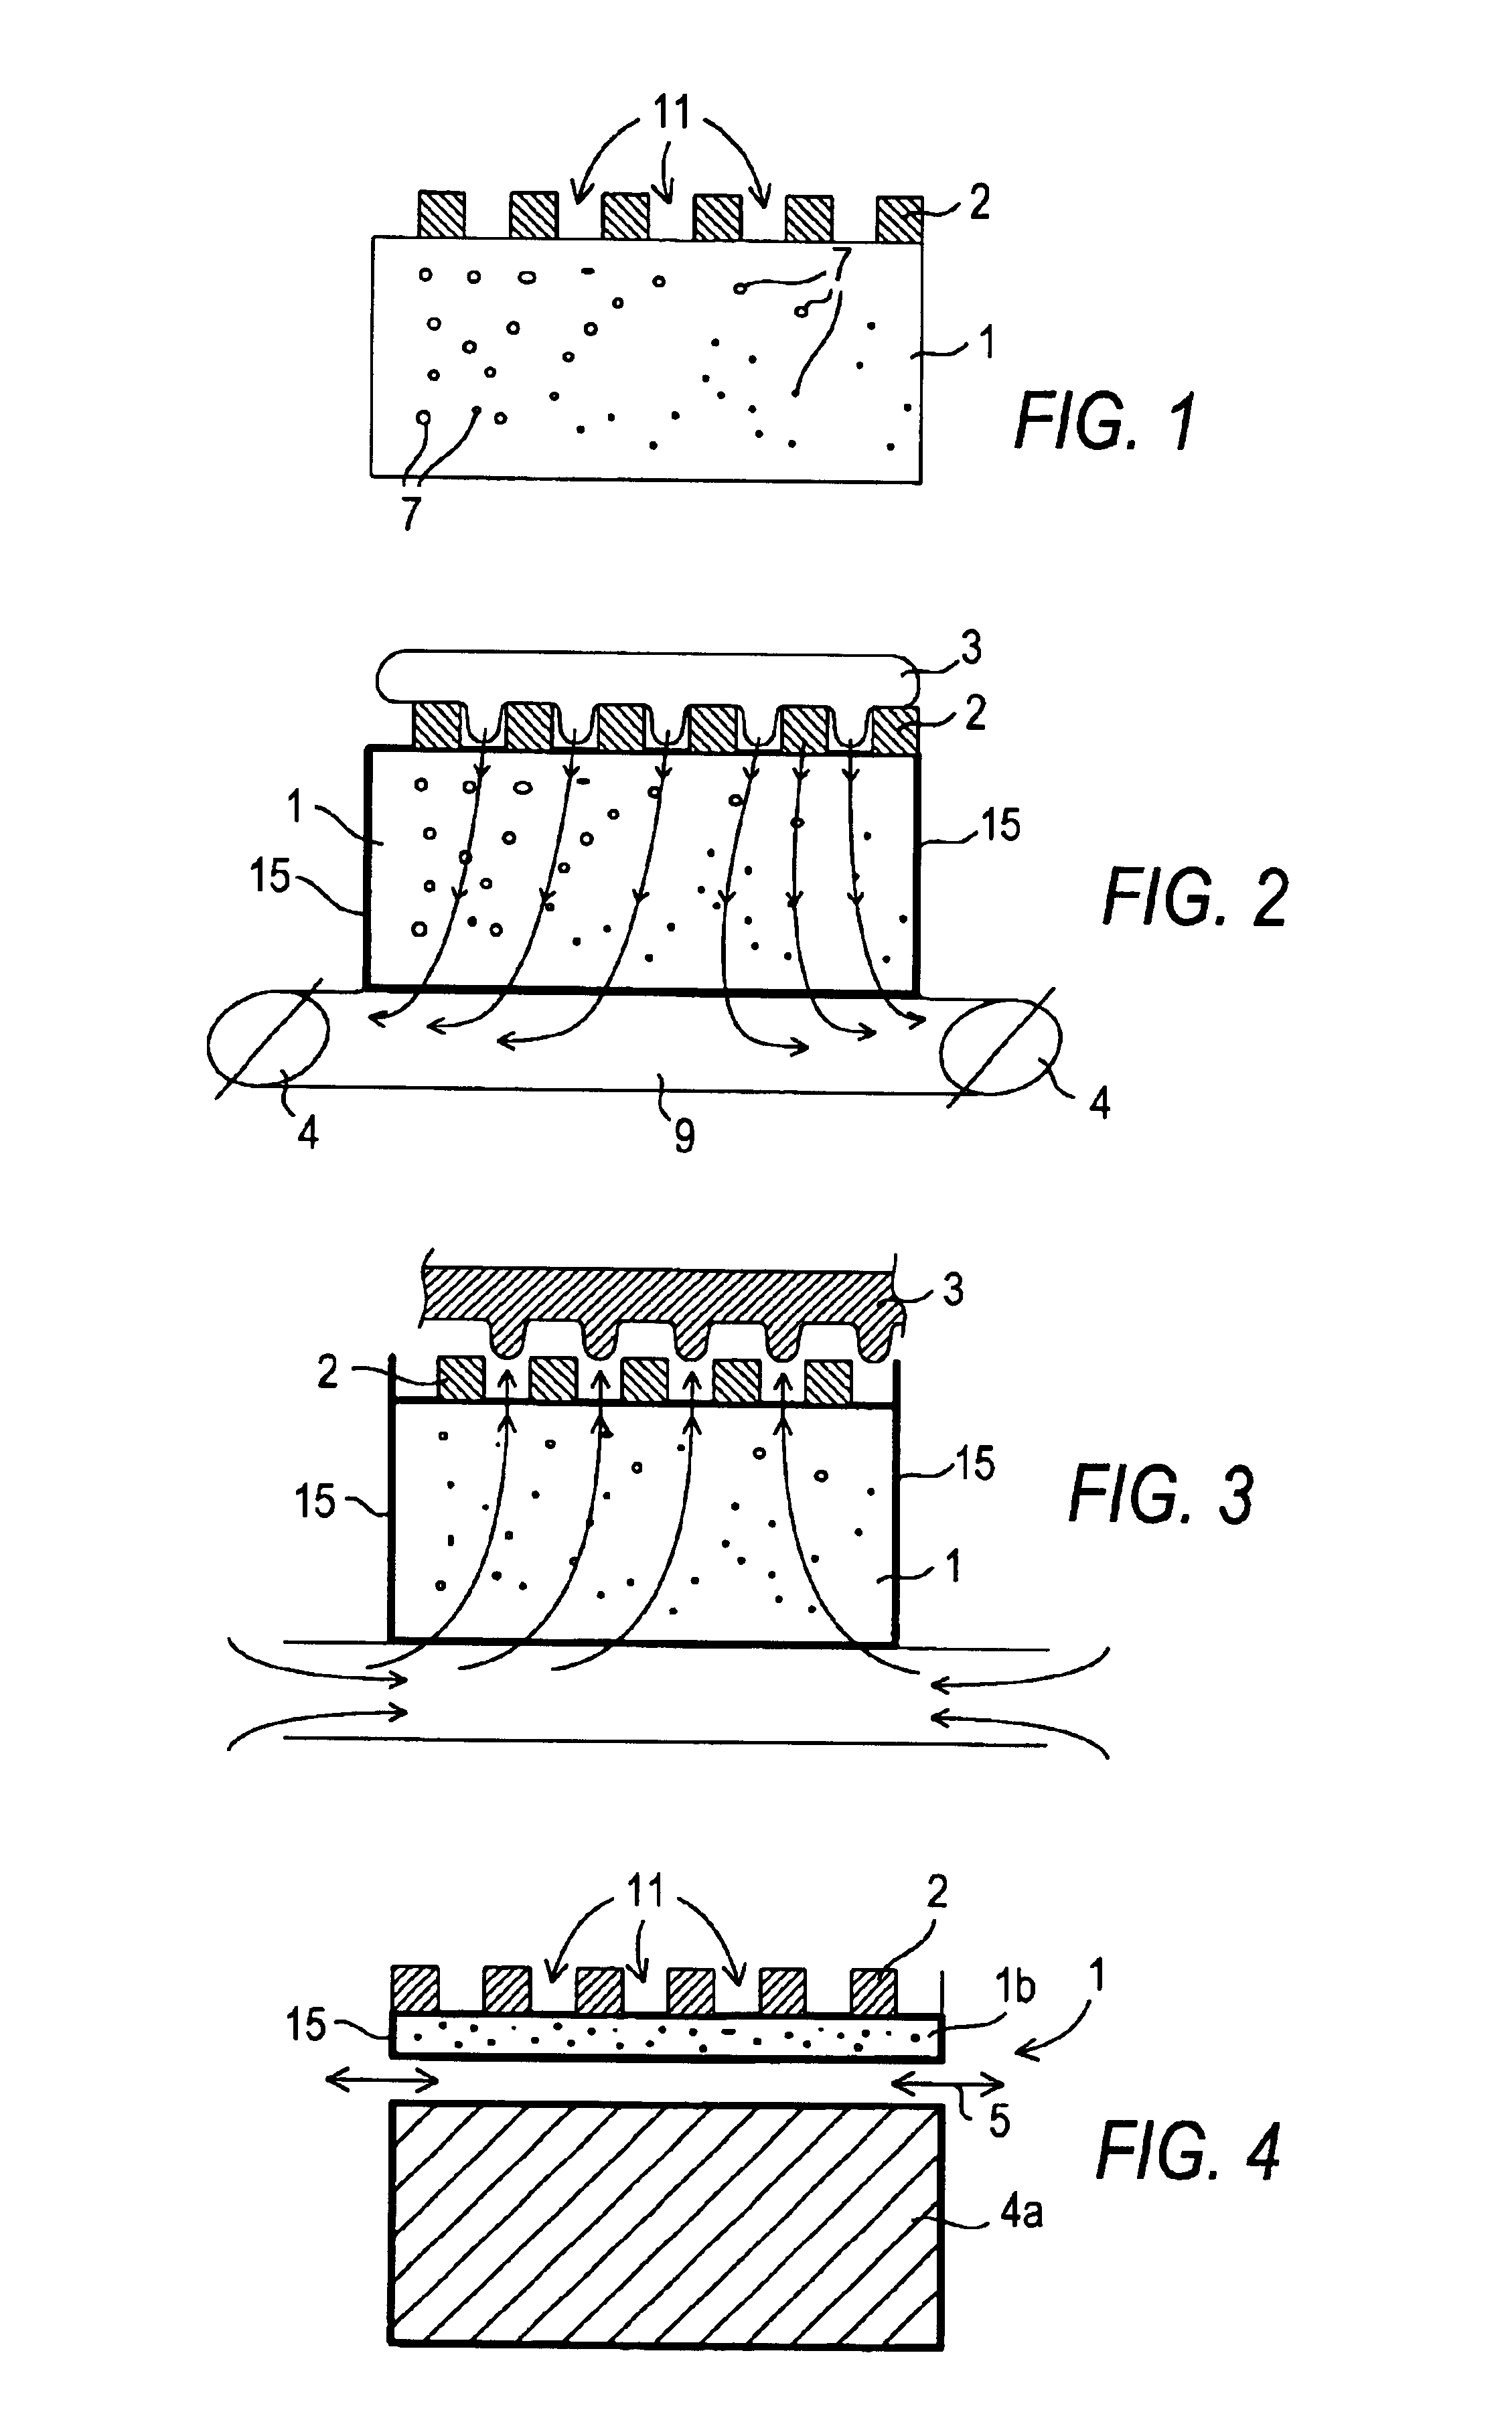 Method for making a microstructure in a glass or plastic substrate according to hot-forming technology and associated forming tool